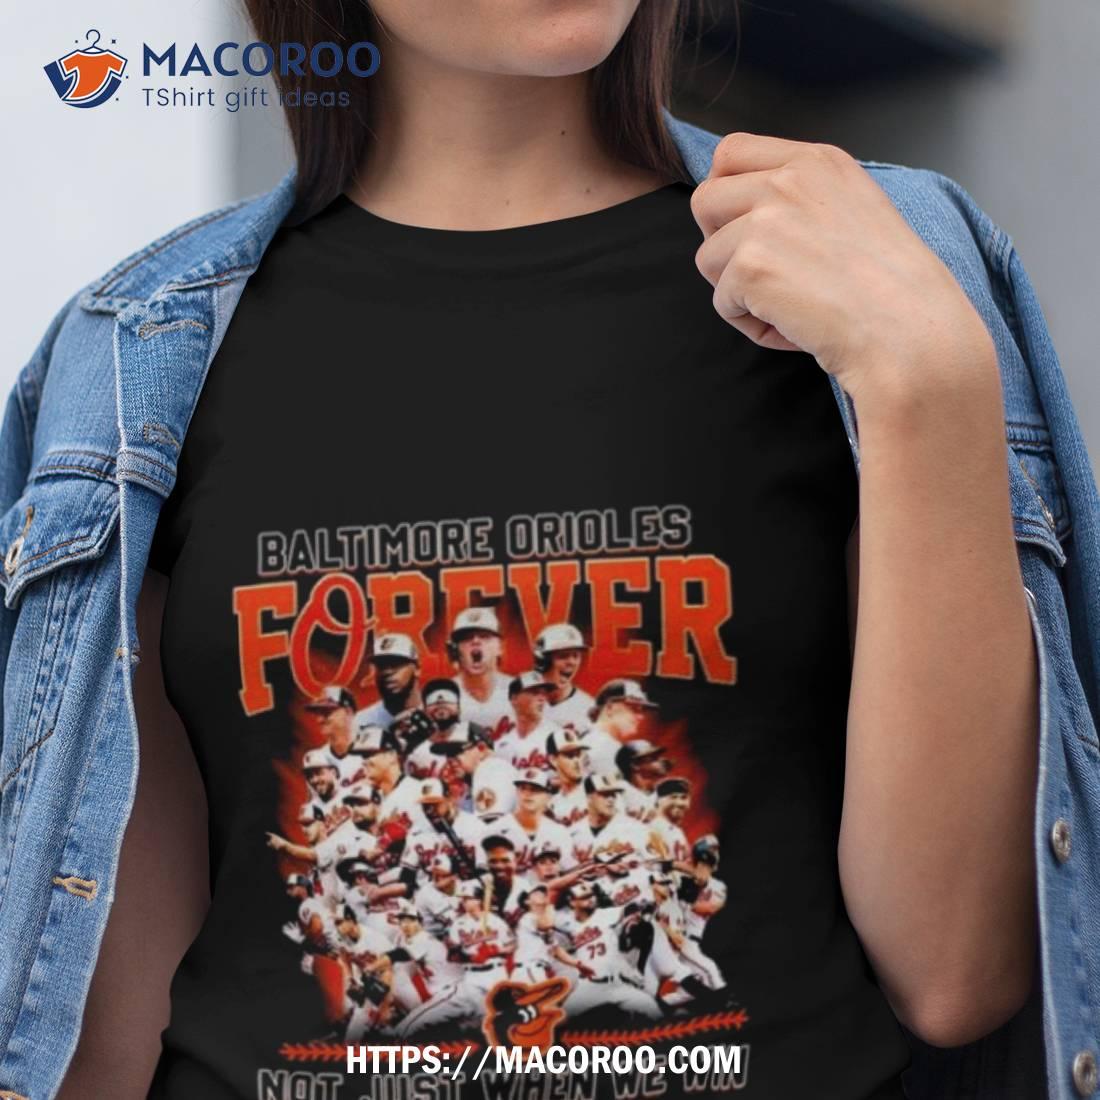 Baltimore Orioles Forever No Just When We Win 2023 Shirt